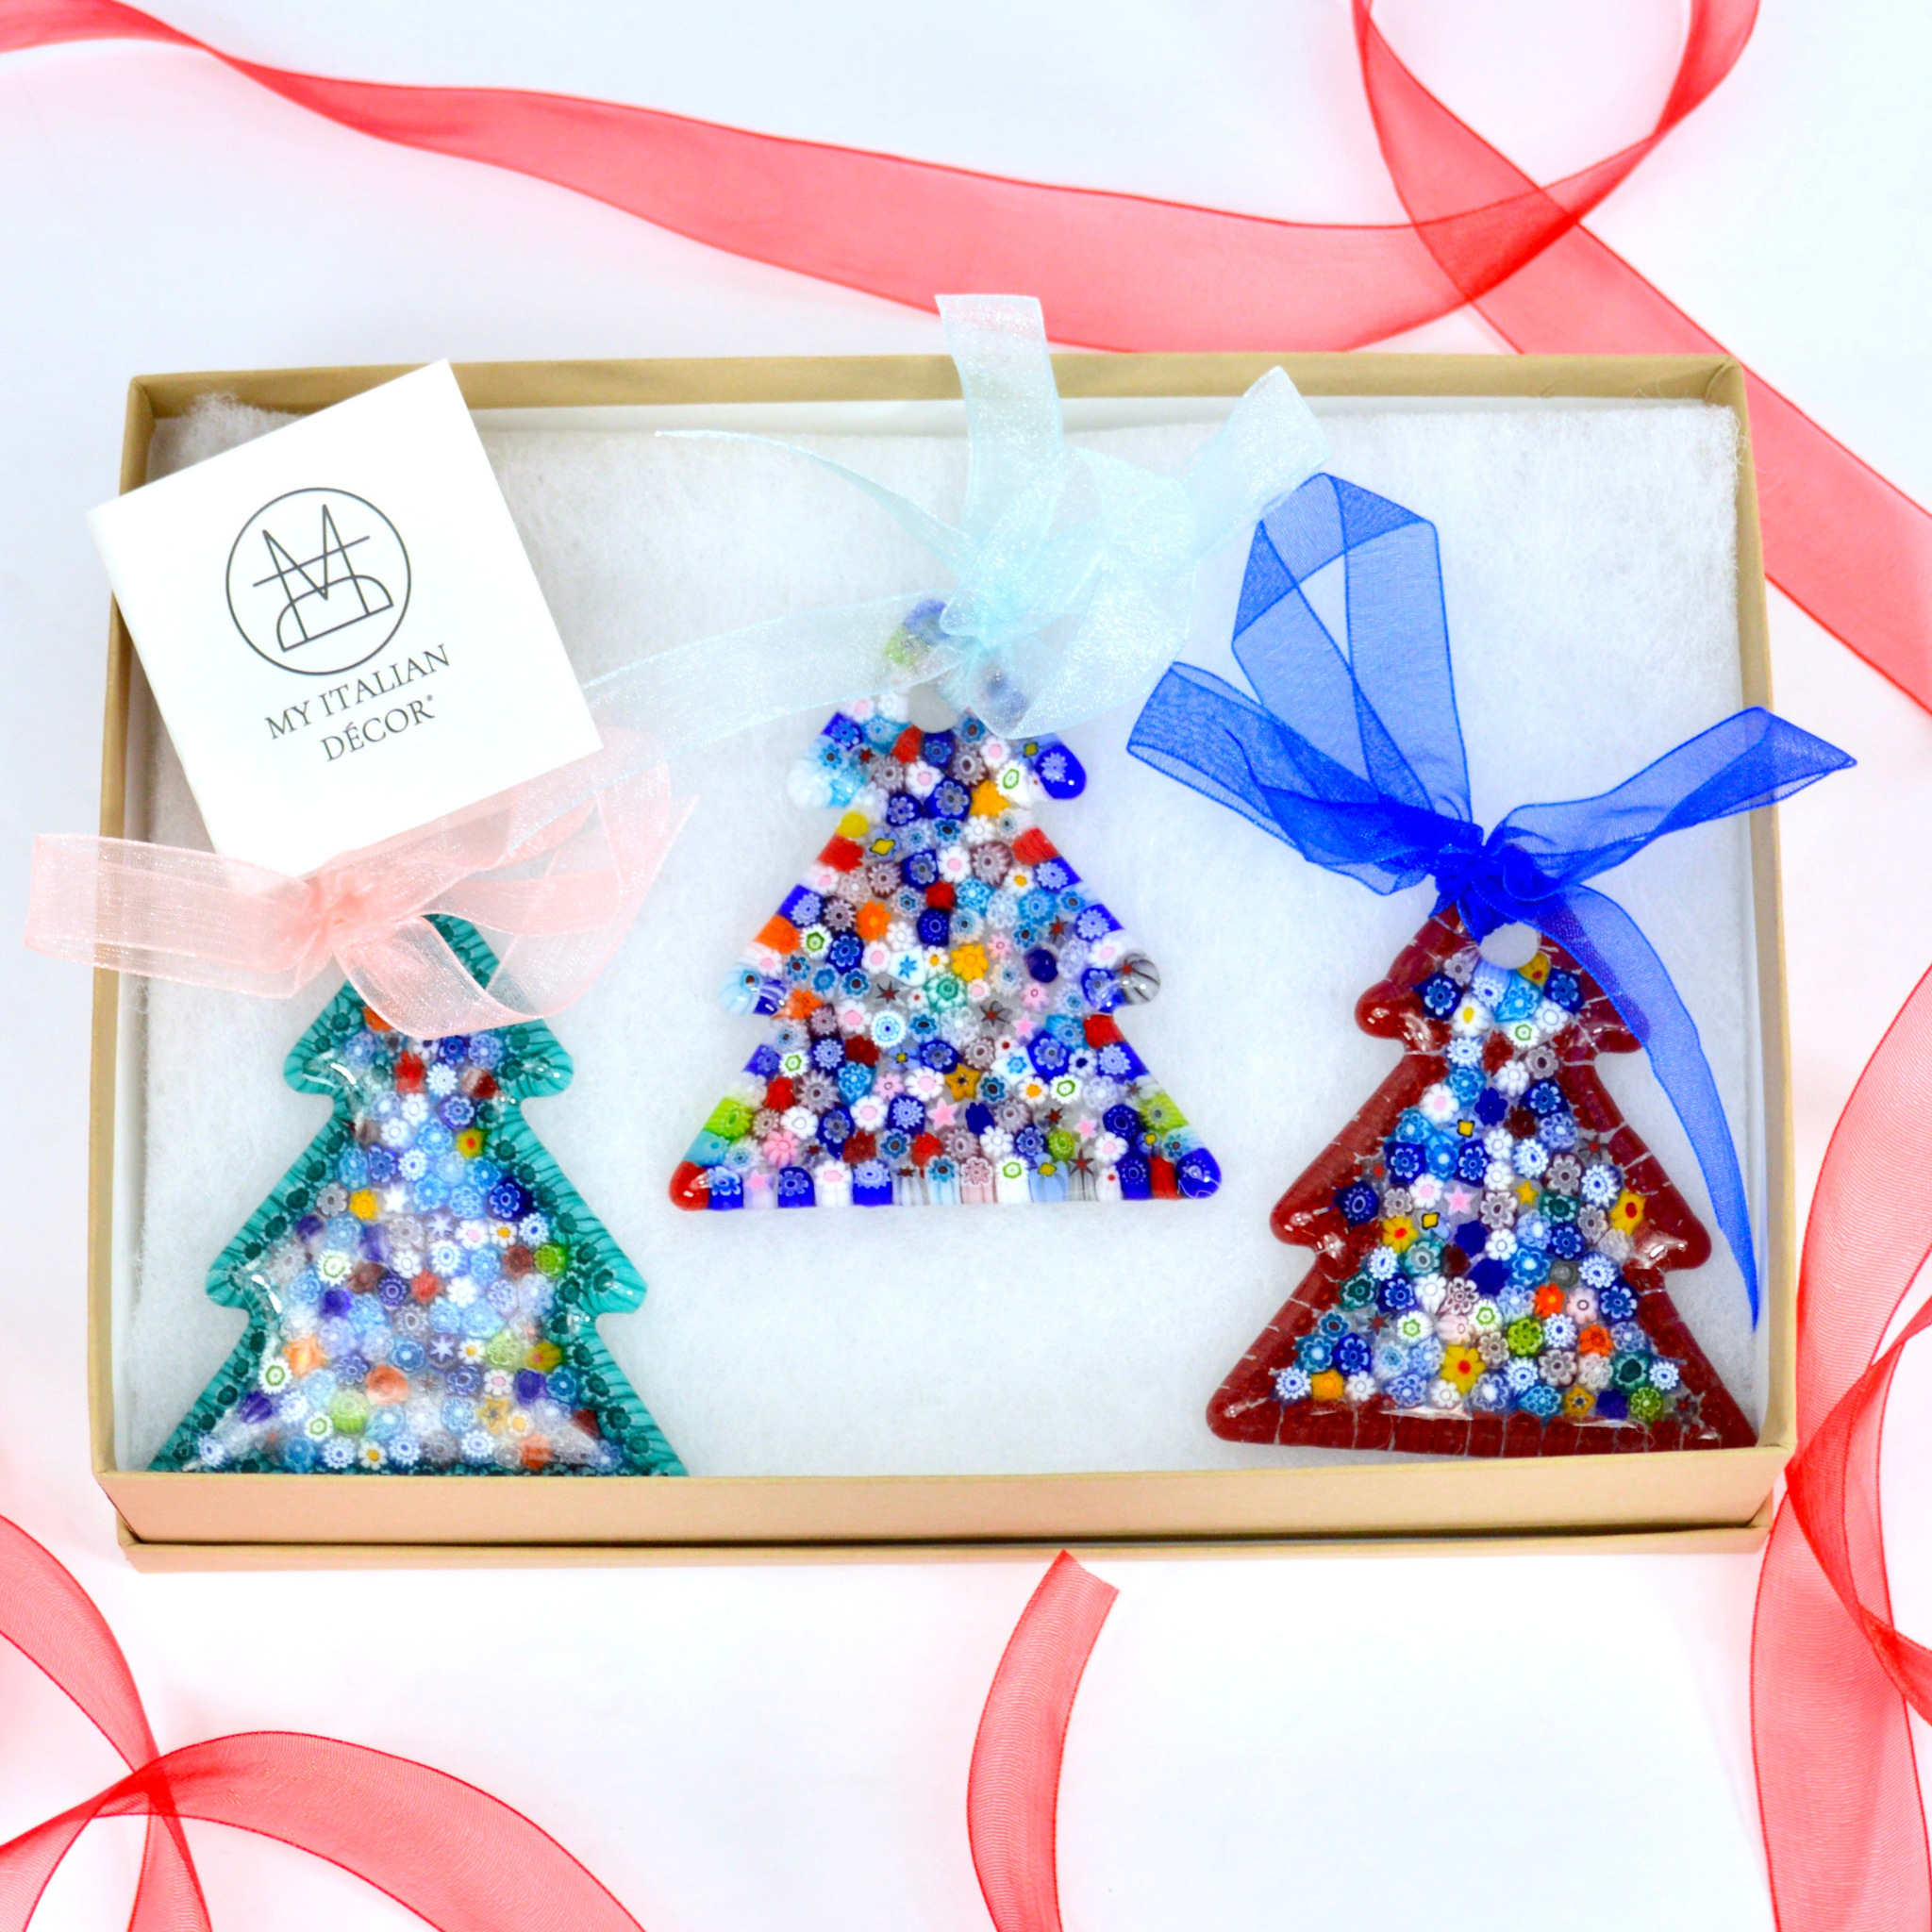 Miniature Christmas Ornaments. Cute and Fun. A Nice Gift. Sold Separately.  -  Denmark